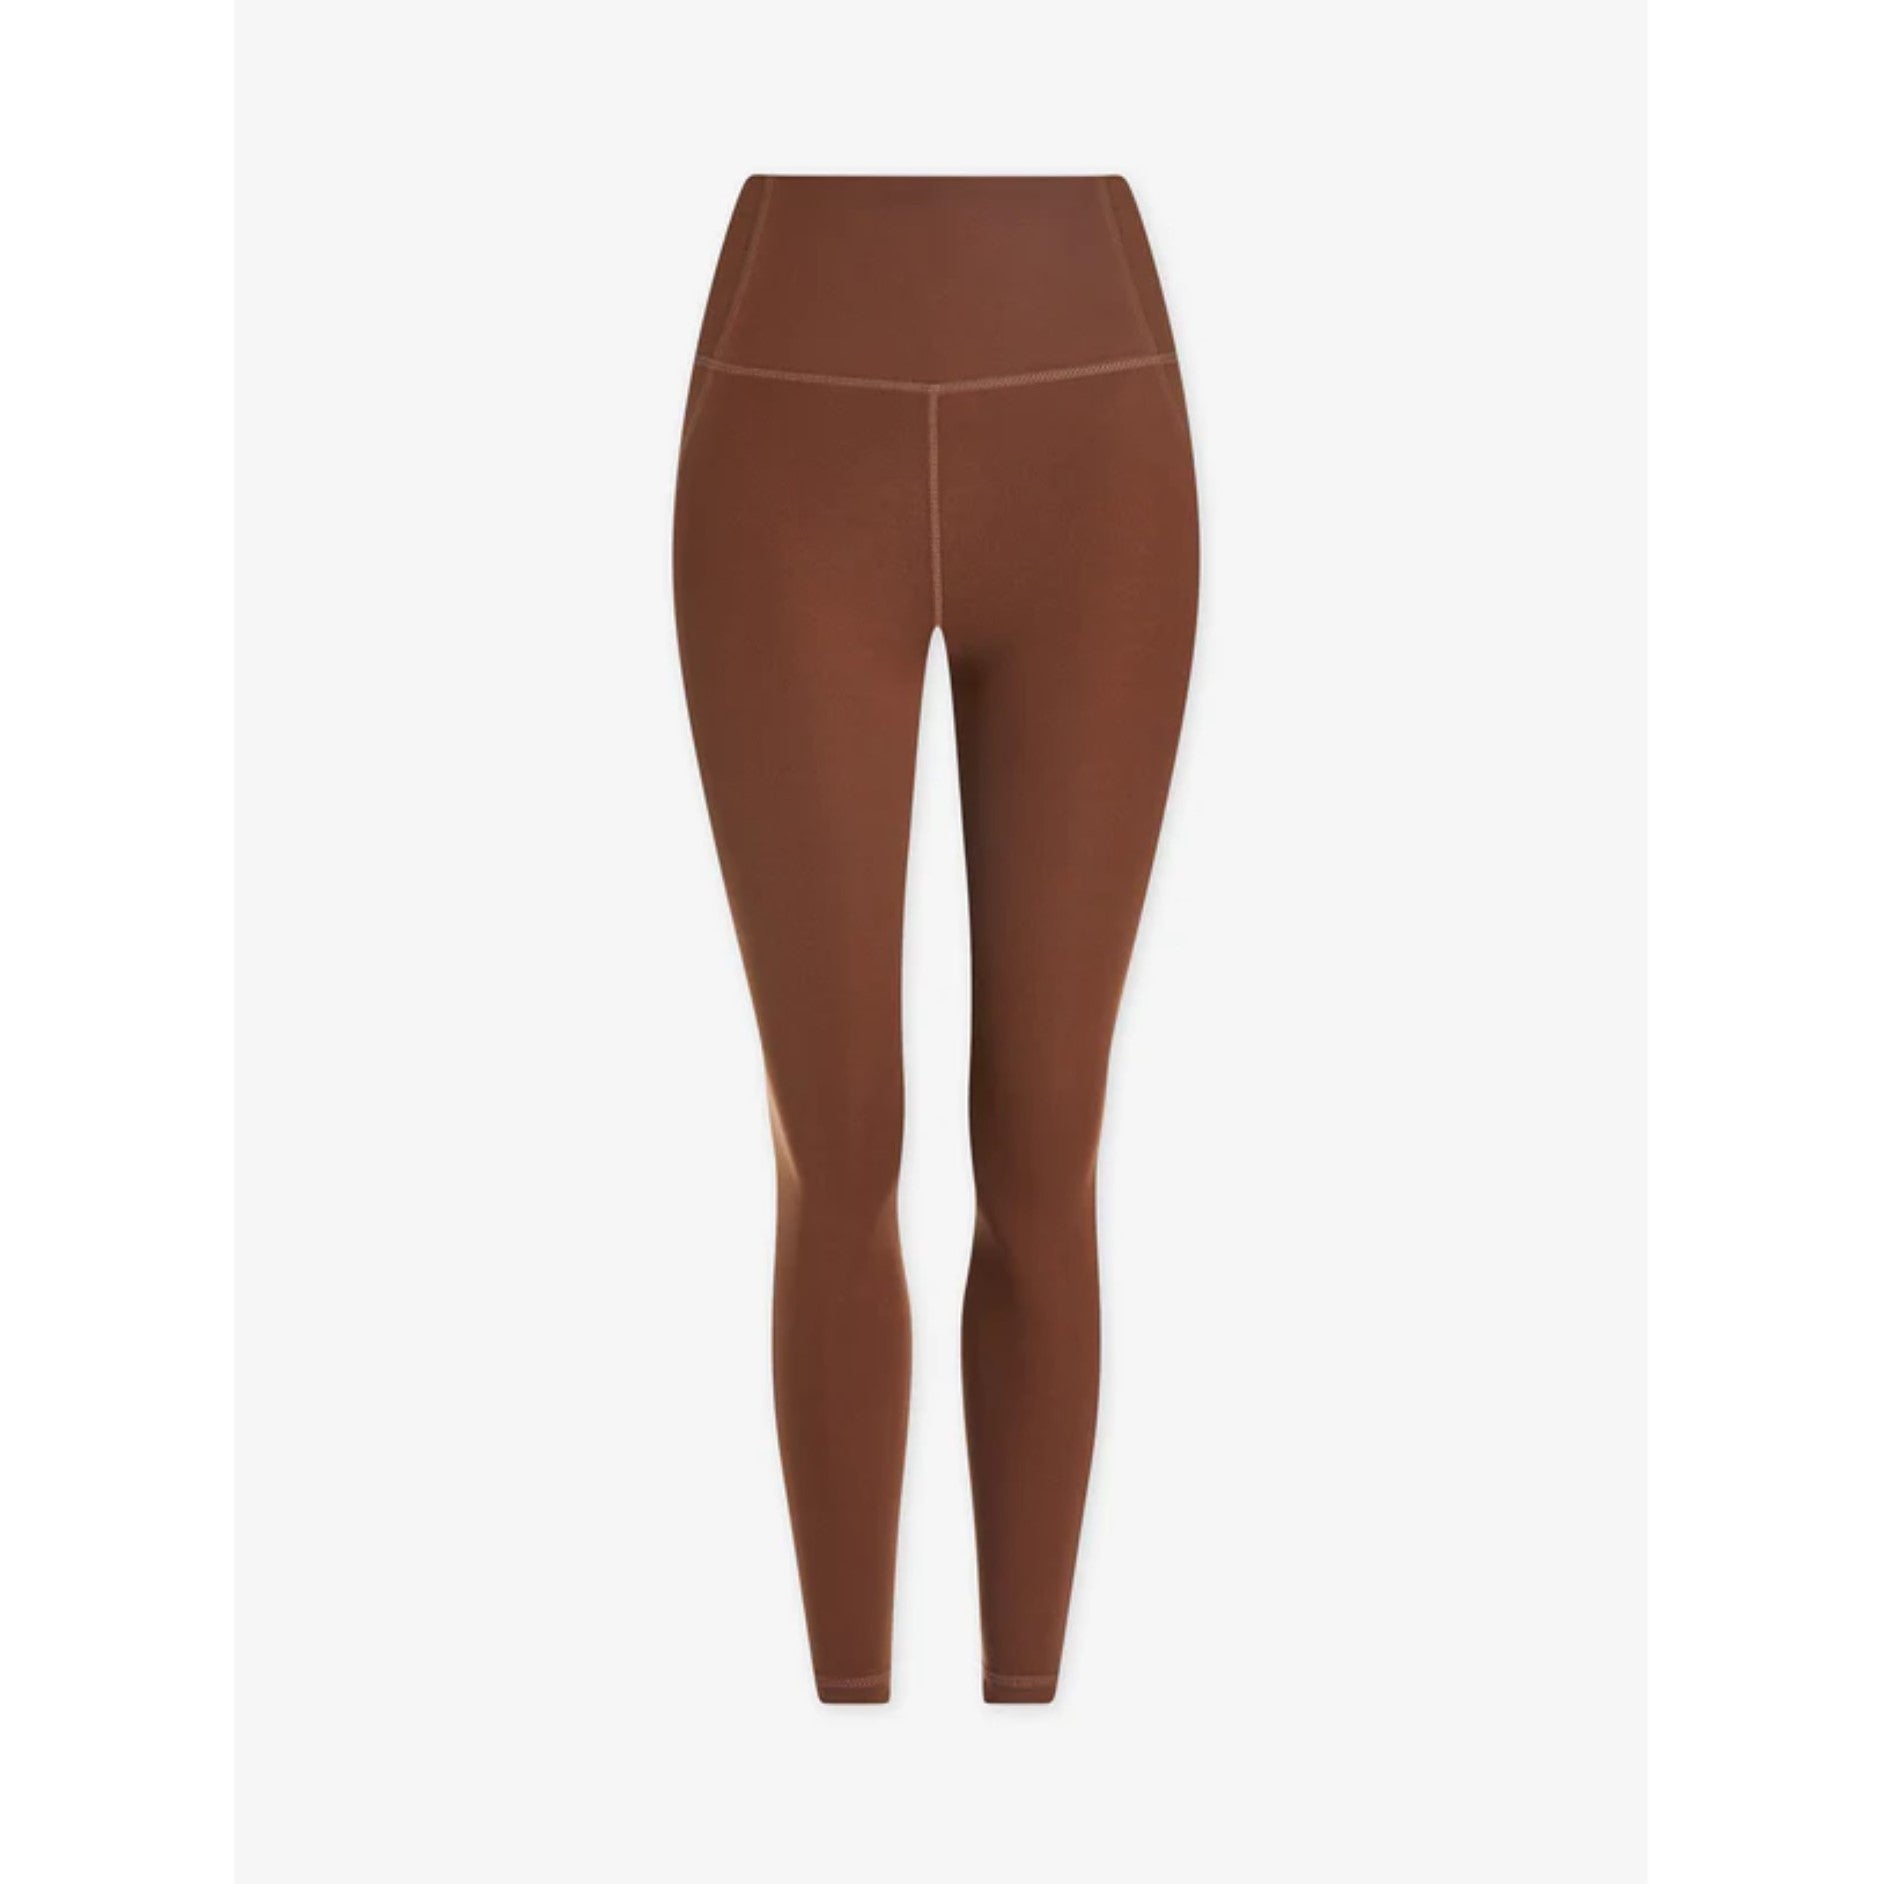 Let's Move 25 High Rise Pocket Leggings - Cocoa Brown